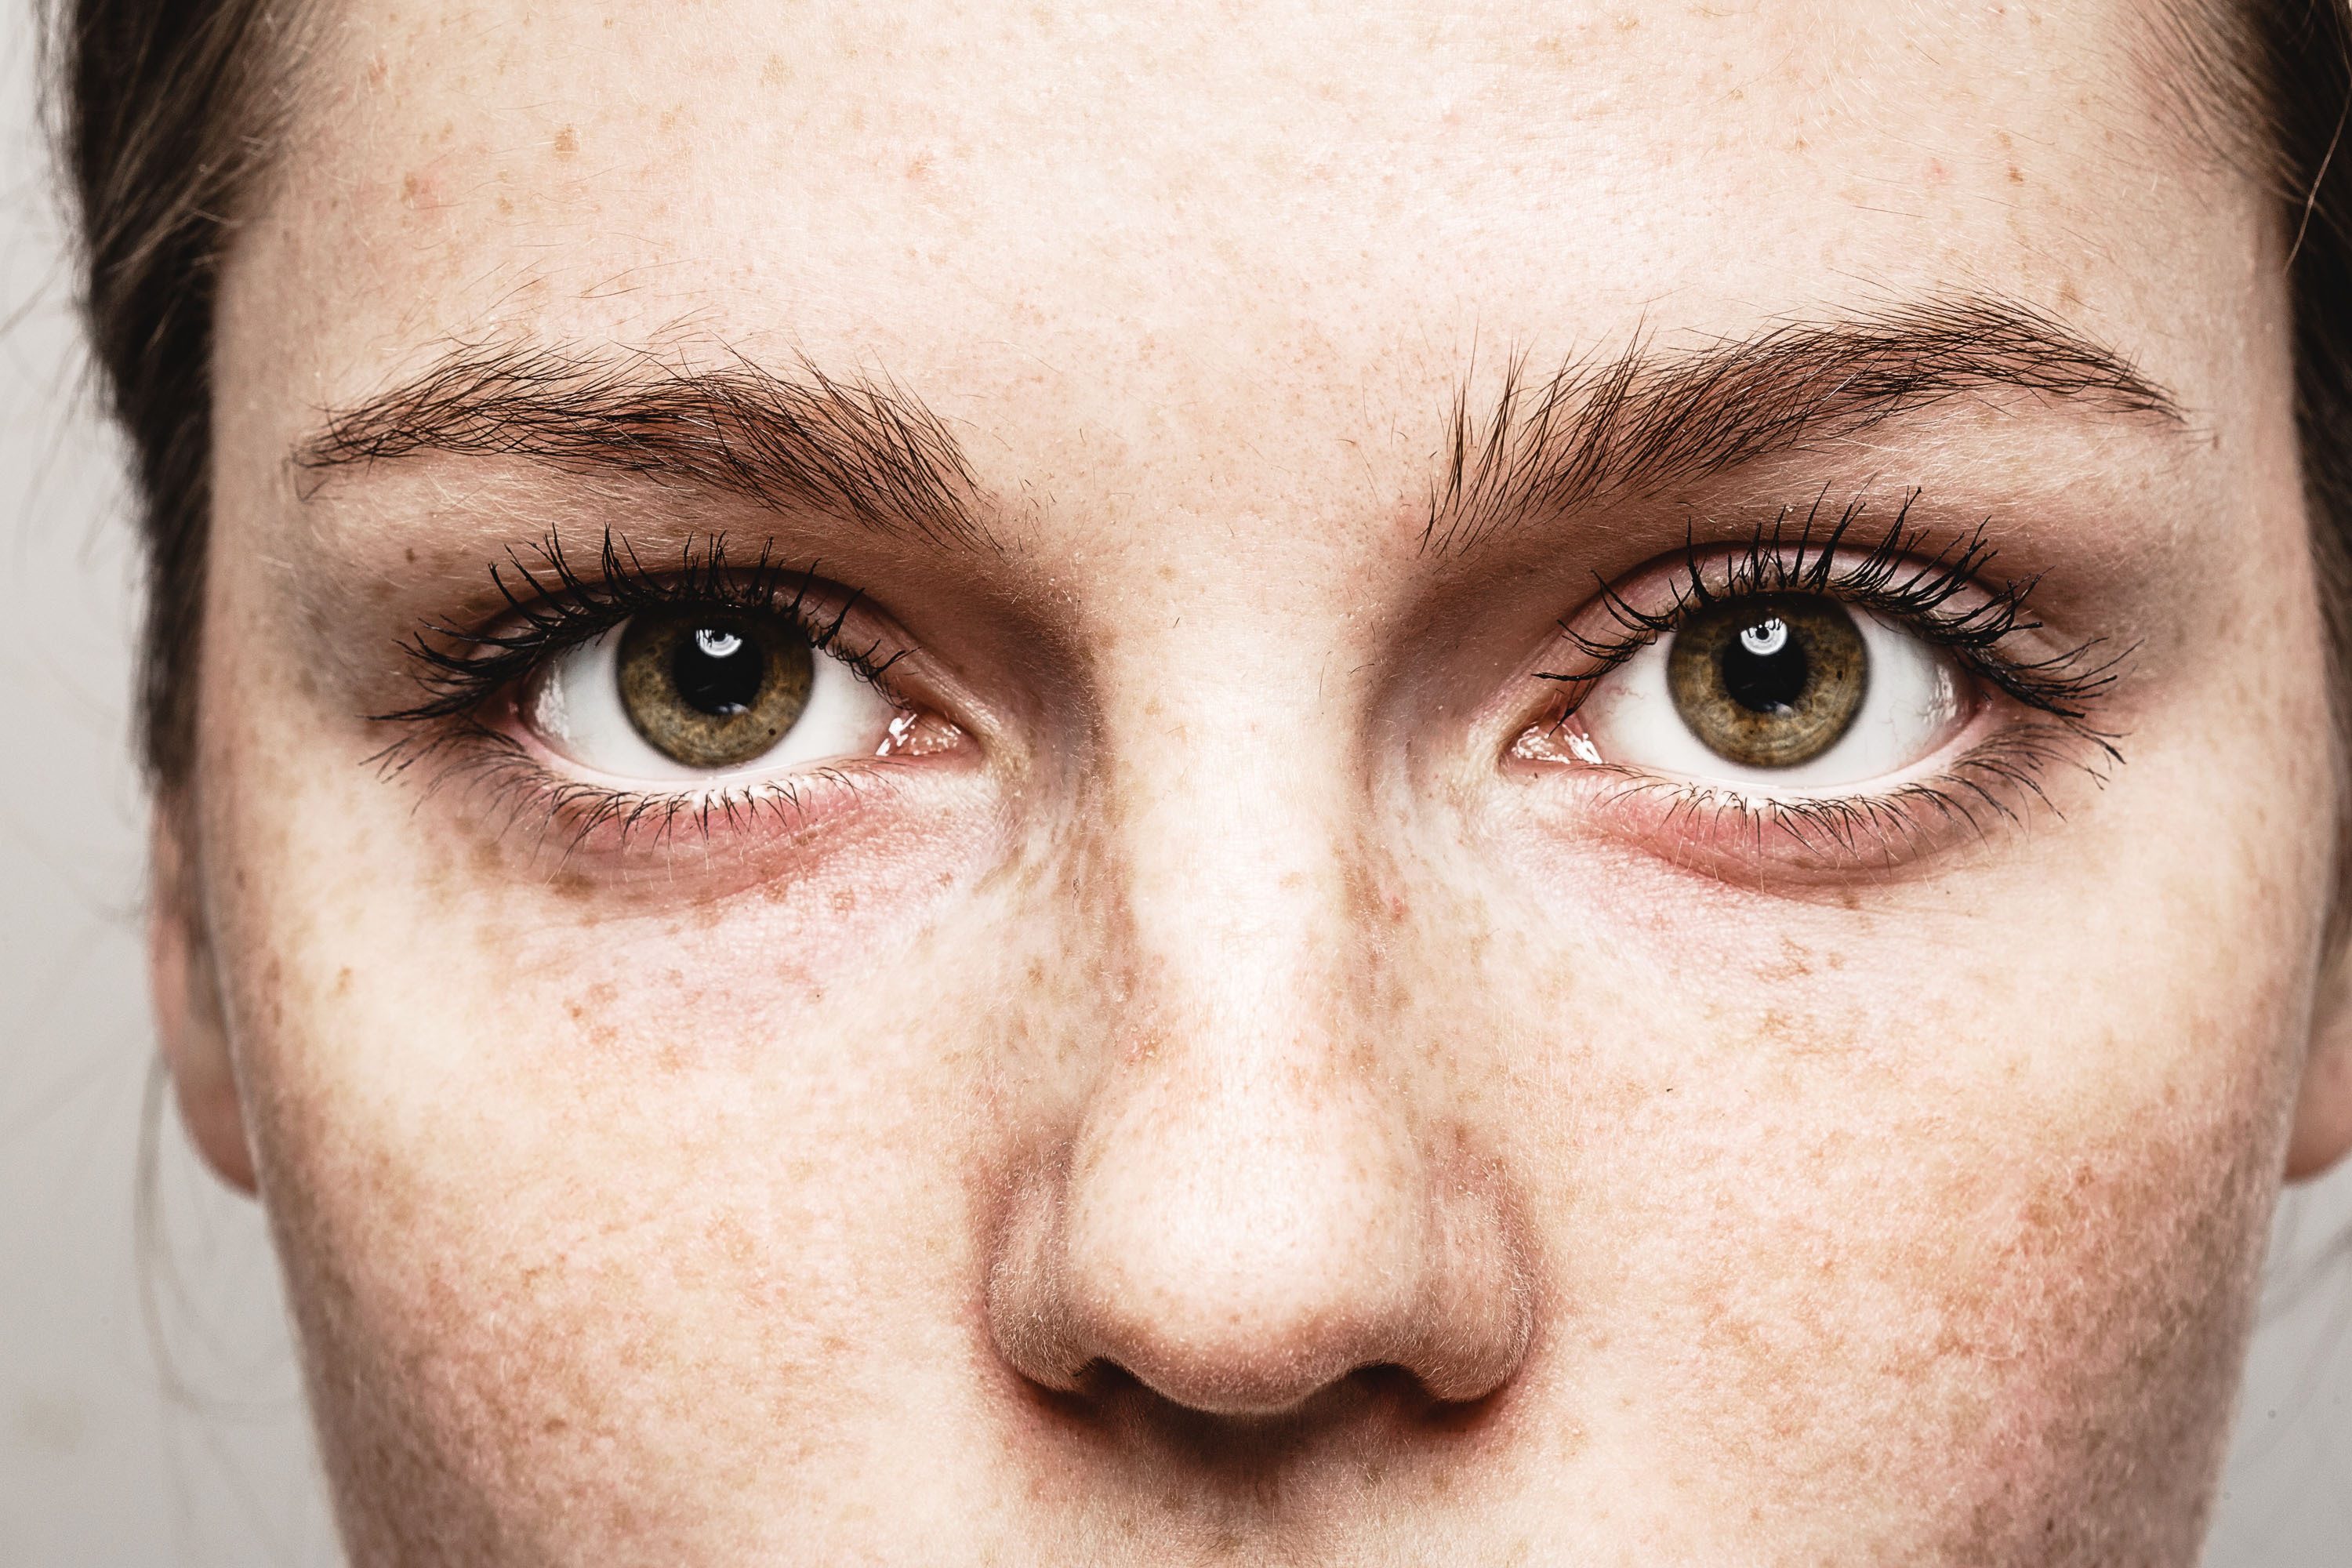 Close-up of freckles and eyes of woman